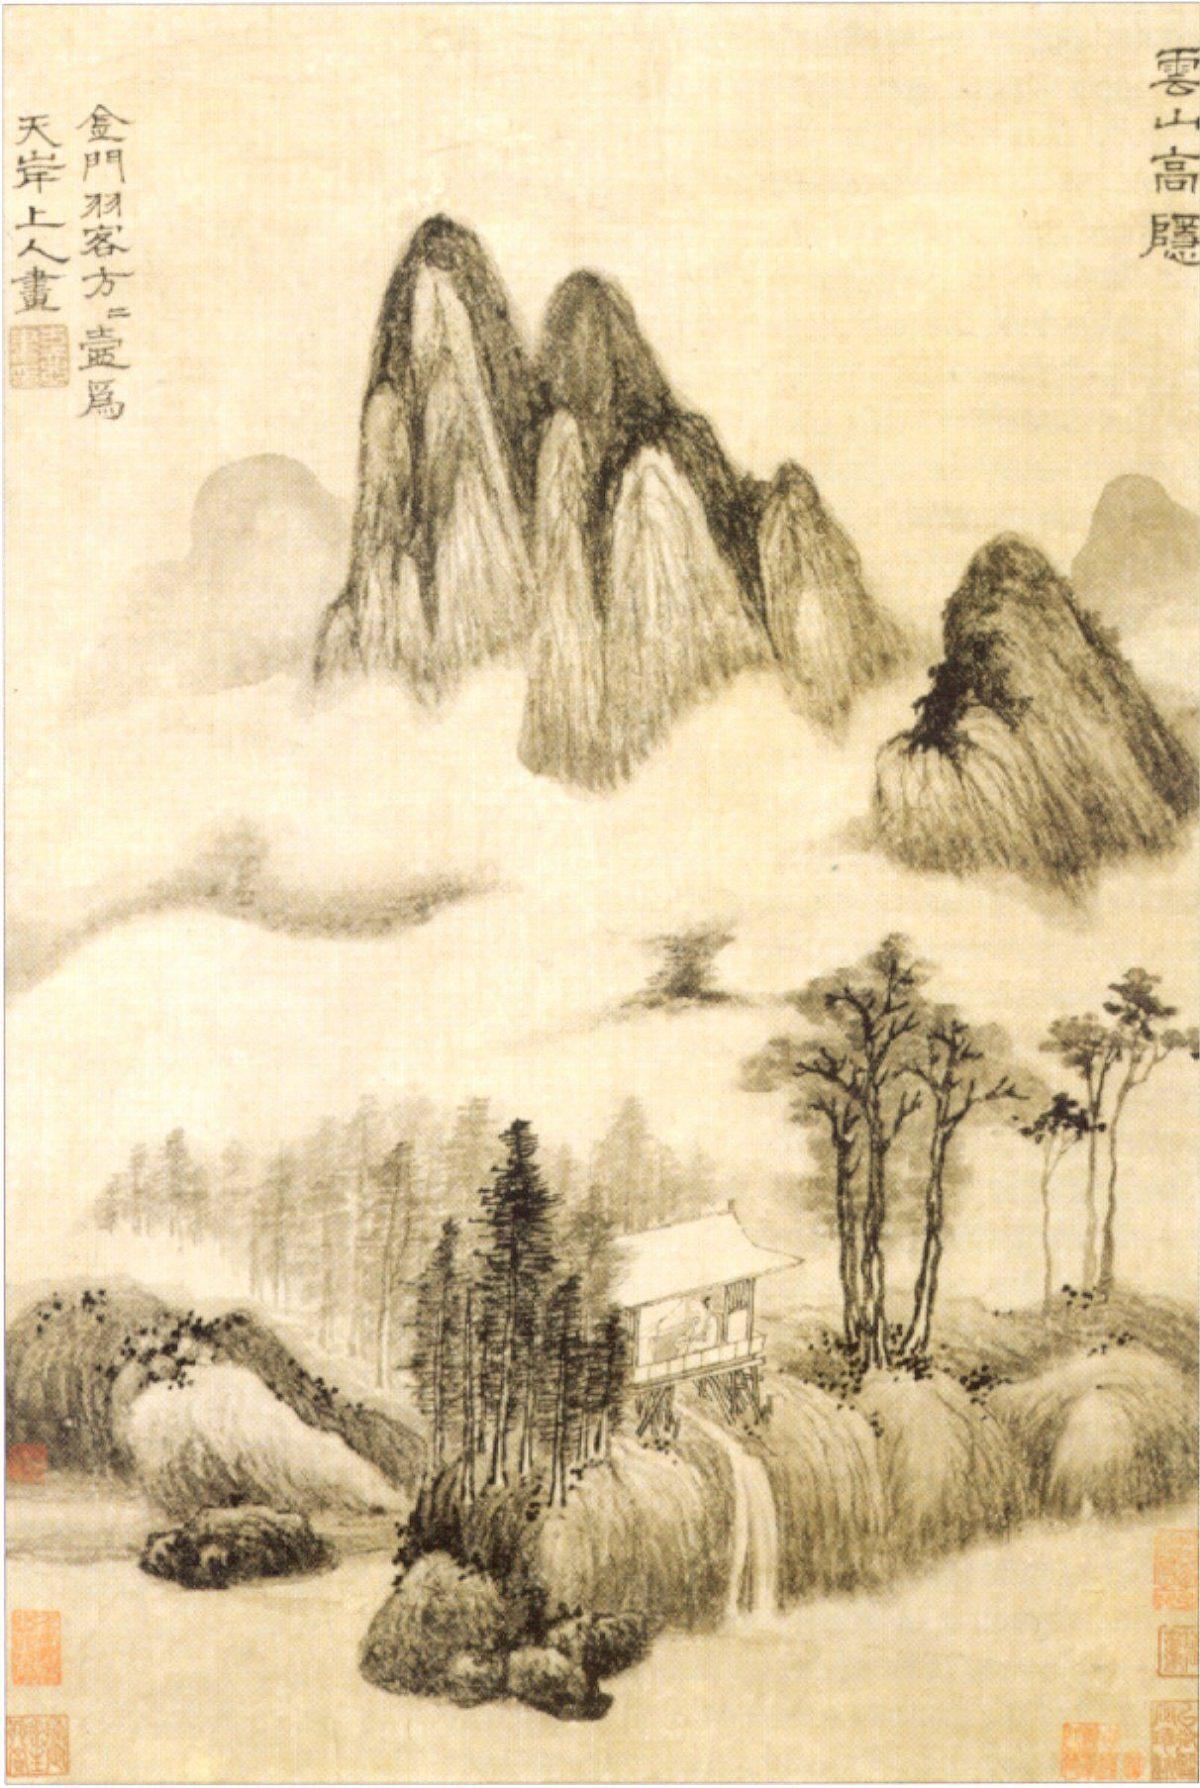 “Lofty Hermitage in Cloudy Mountains,” 14th century, by Fang Fanghu. Ink on paper, Honolulu Academy of Arts. (Public Domain)